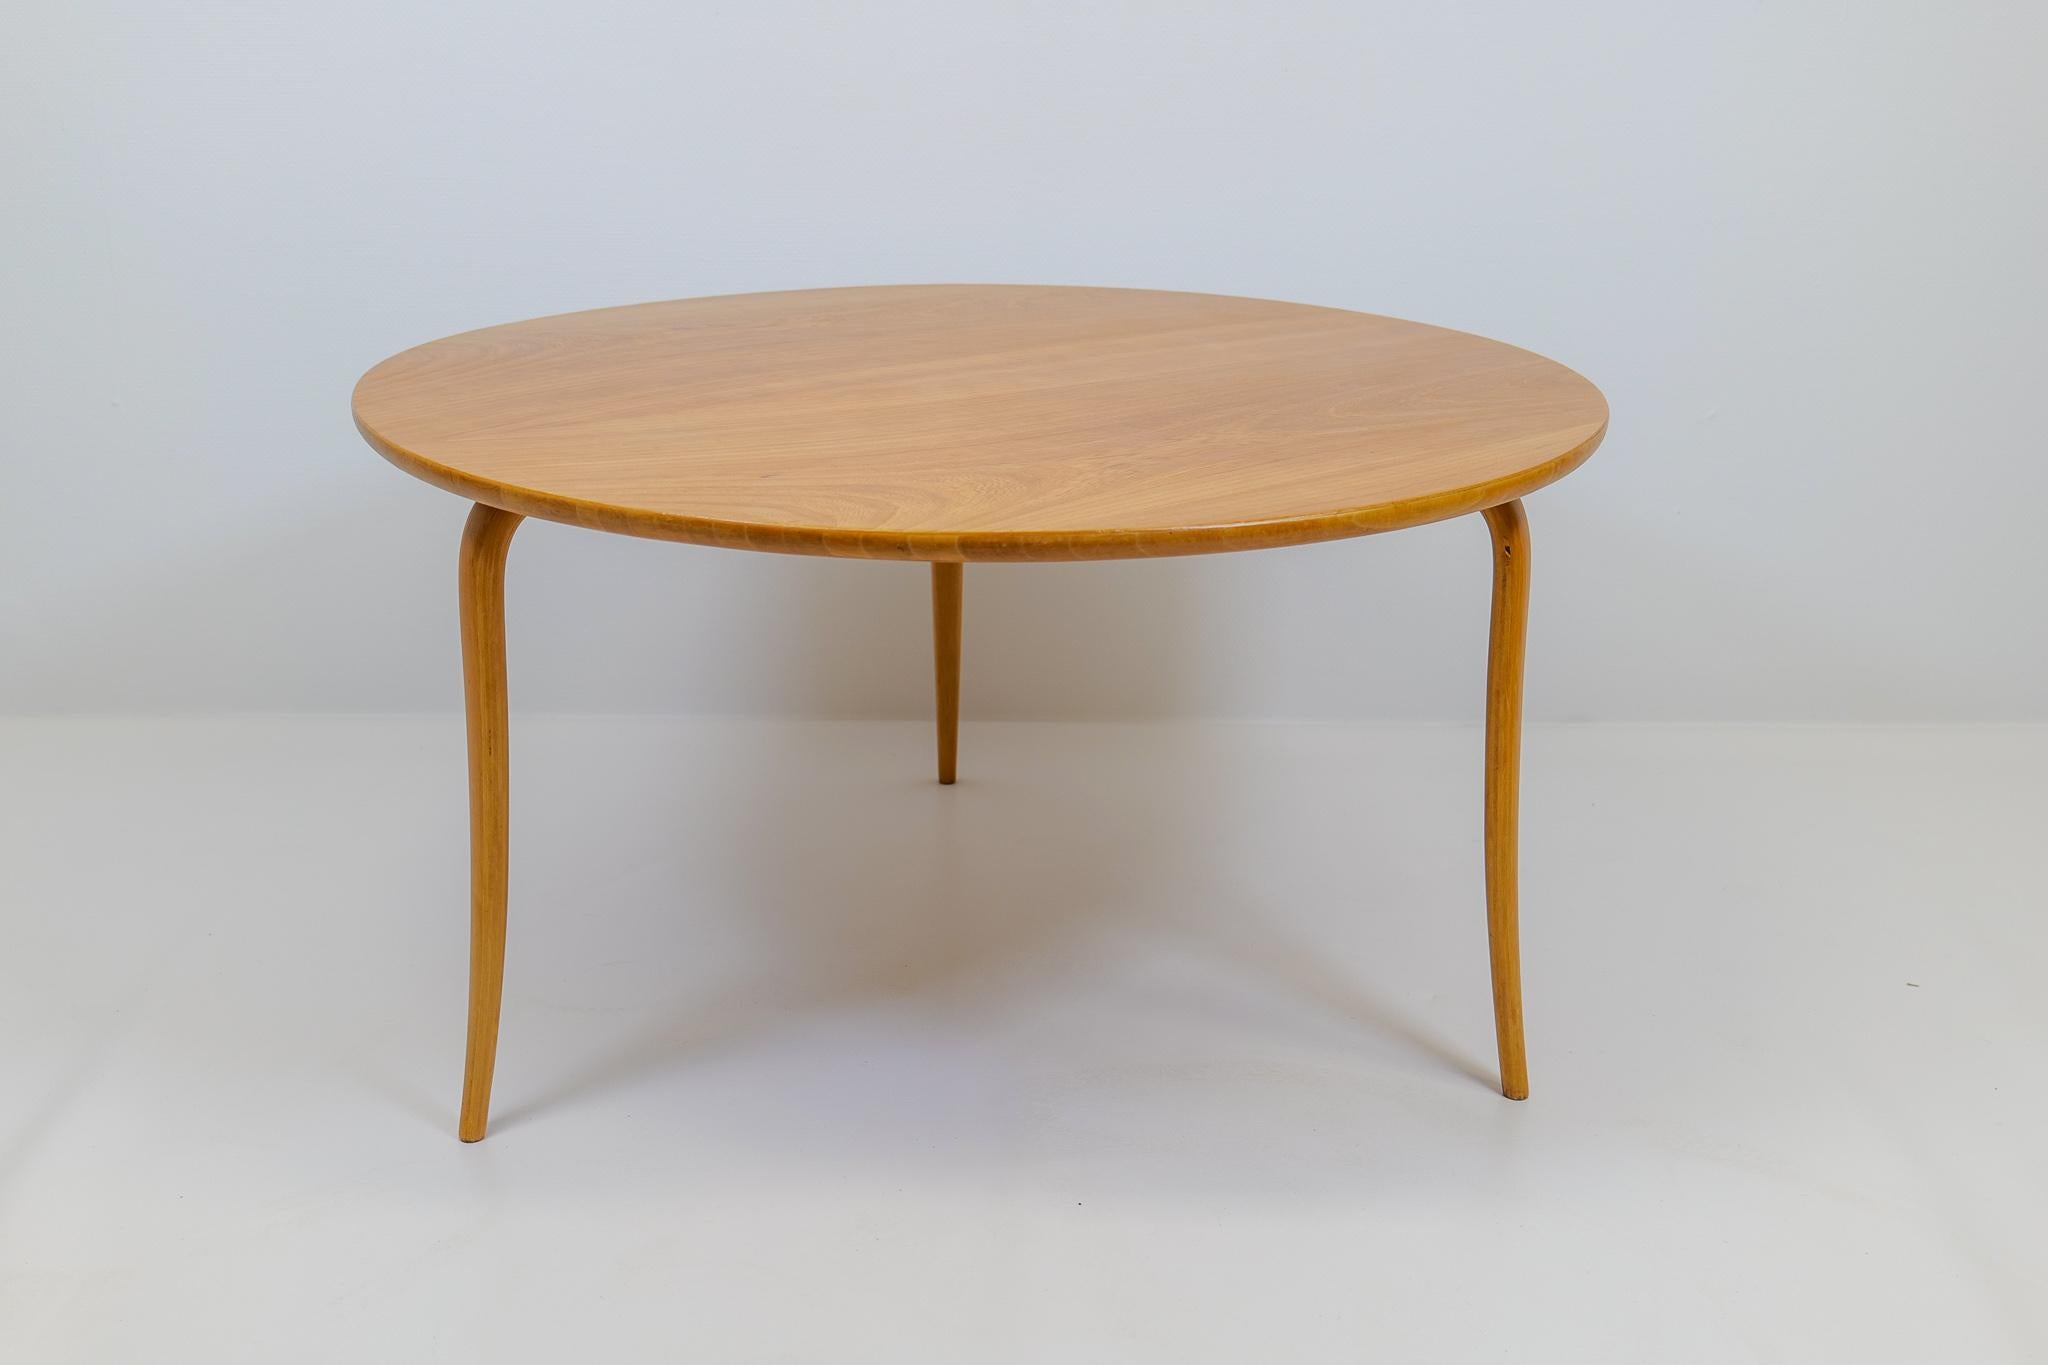 Swedish Grace Early Bruno Mathsson Large 'Annika' Coffee Table 1930s For Sale 6